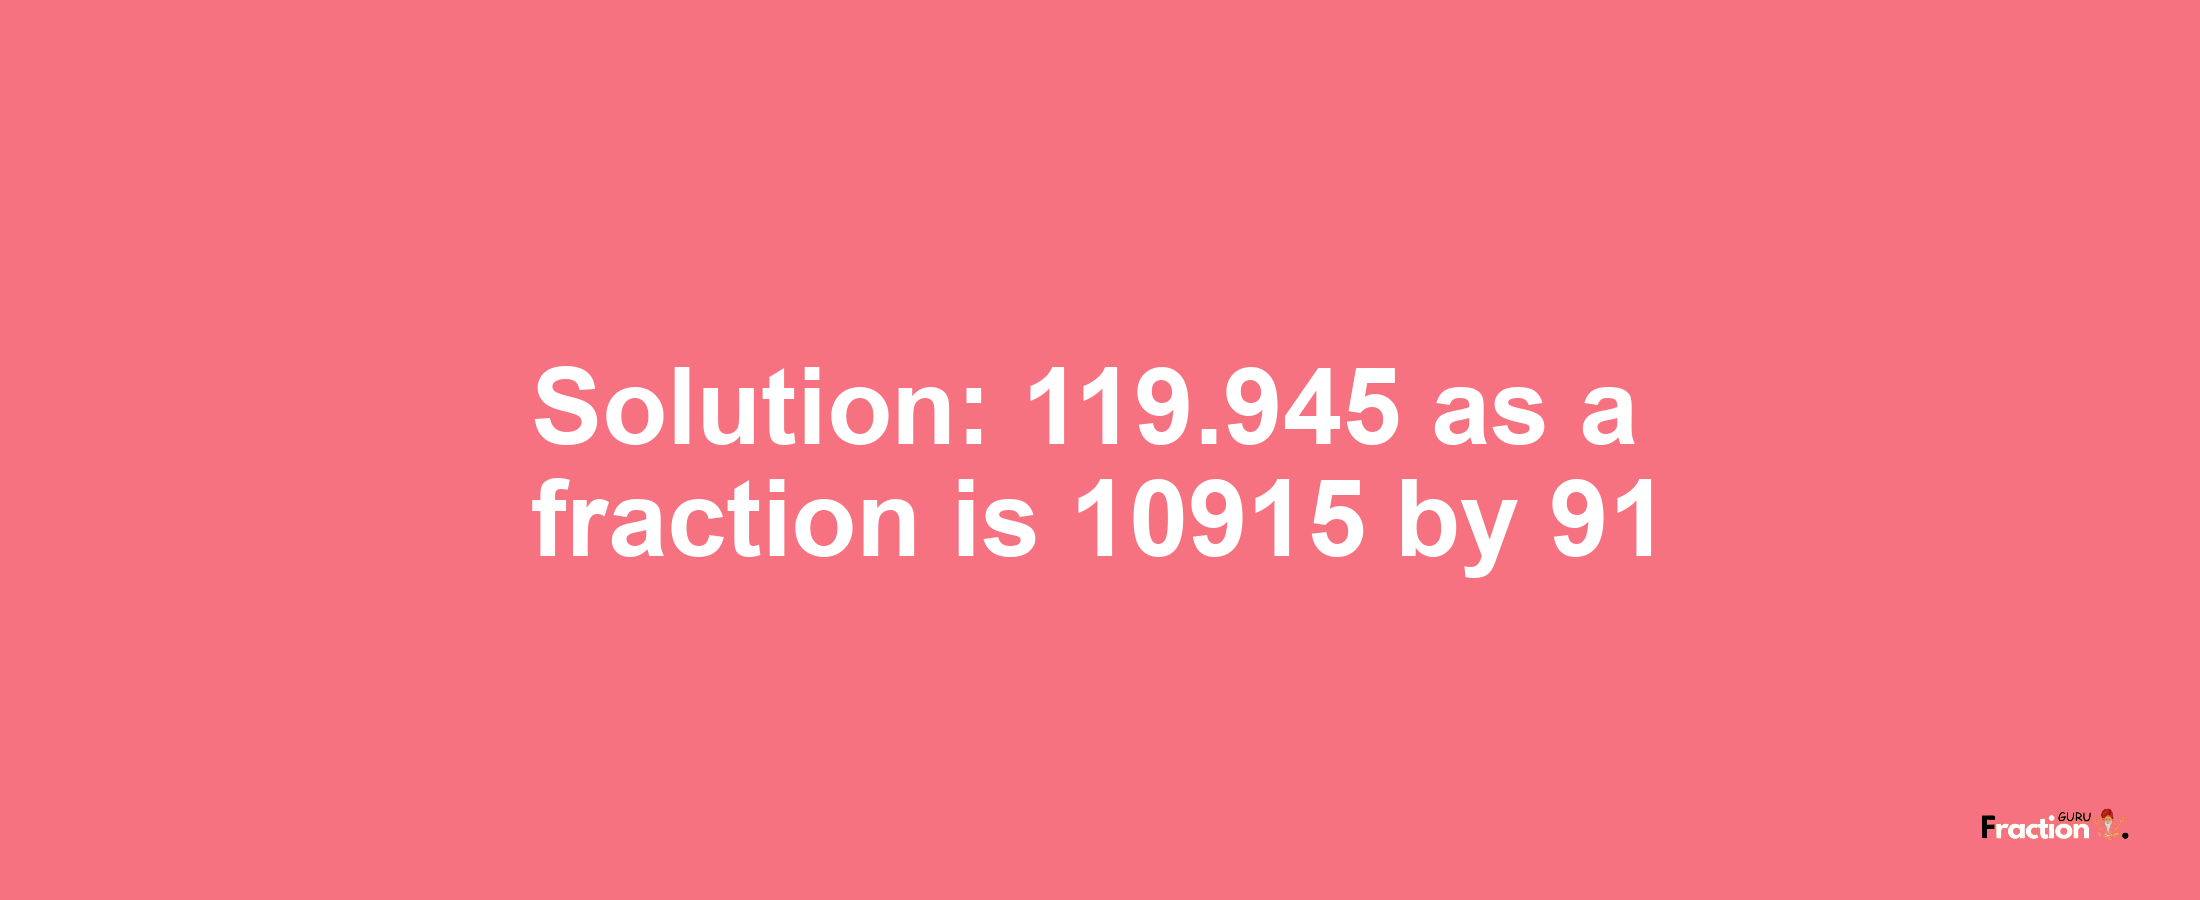 Solution:119.945 as a fraction is 10915/91